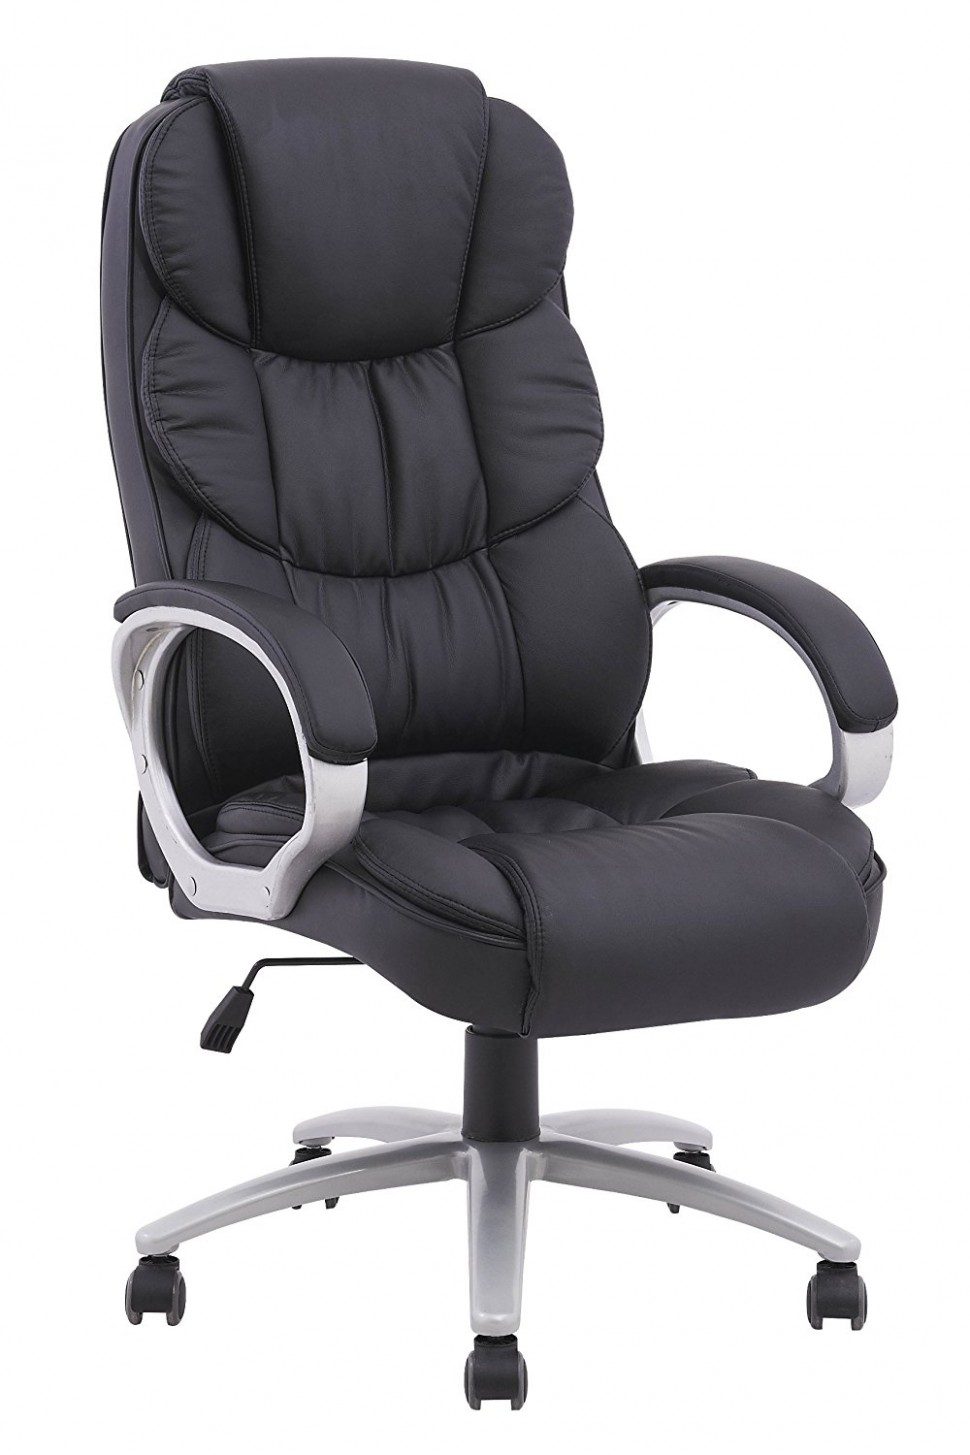 comfortable computer chairs ... large size of chair office conference room chairs comfortable computer YRXNUPZ